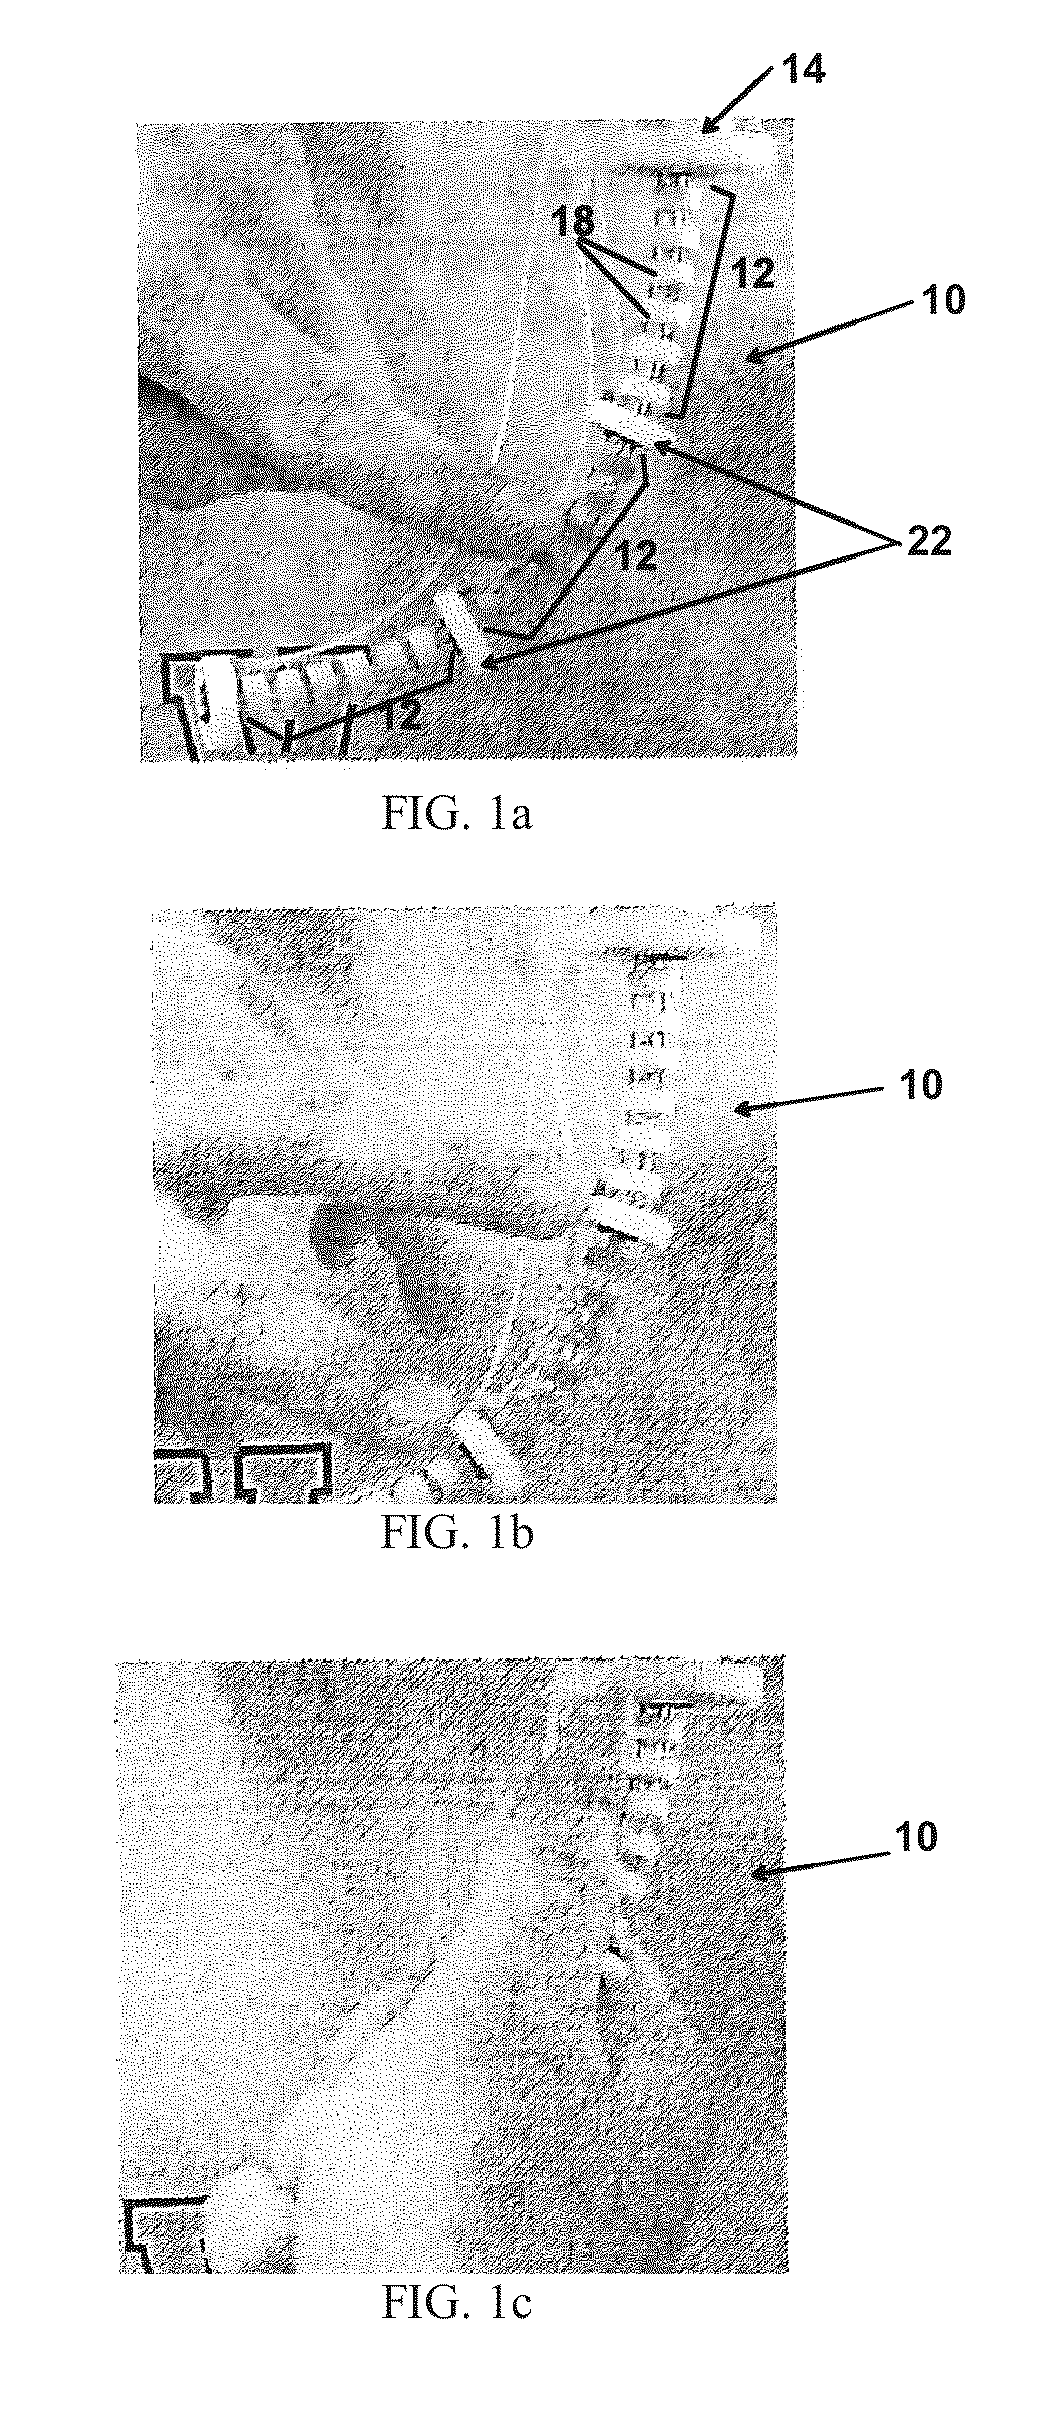 Method and system for contact detection and contact localization along continuum robots